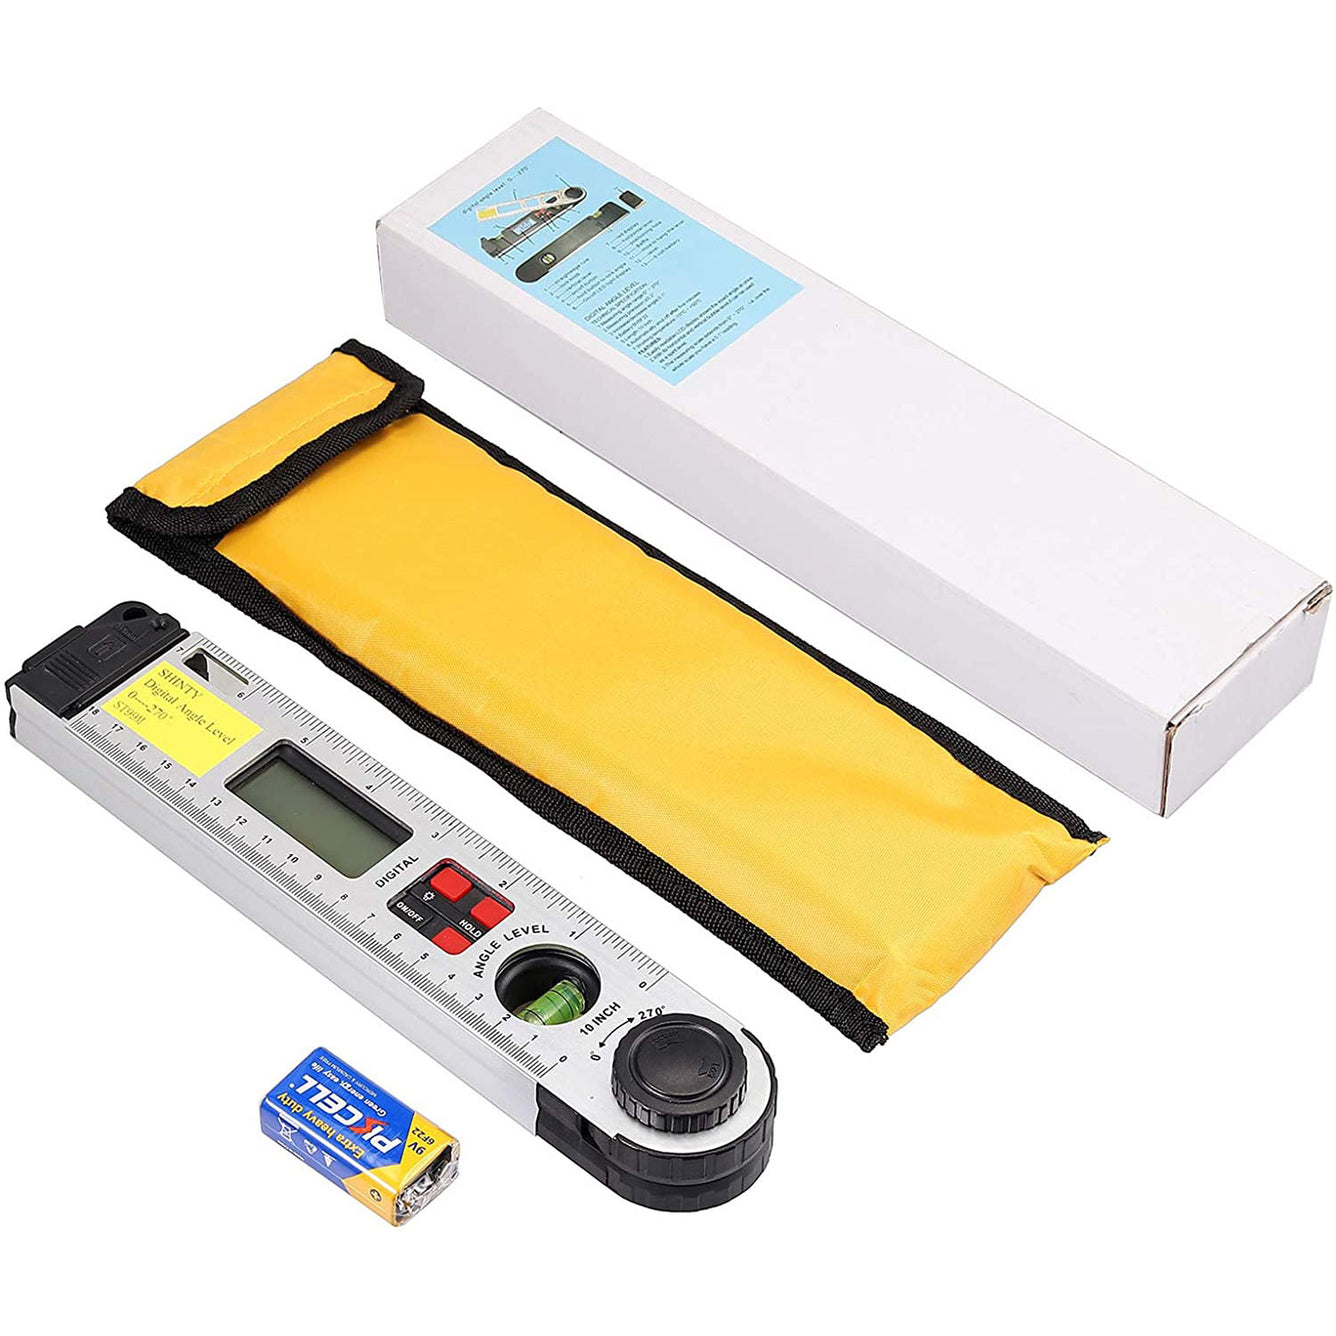 Proster Angle Gauge 0~270° Digital LCD Inclinometer